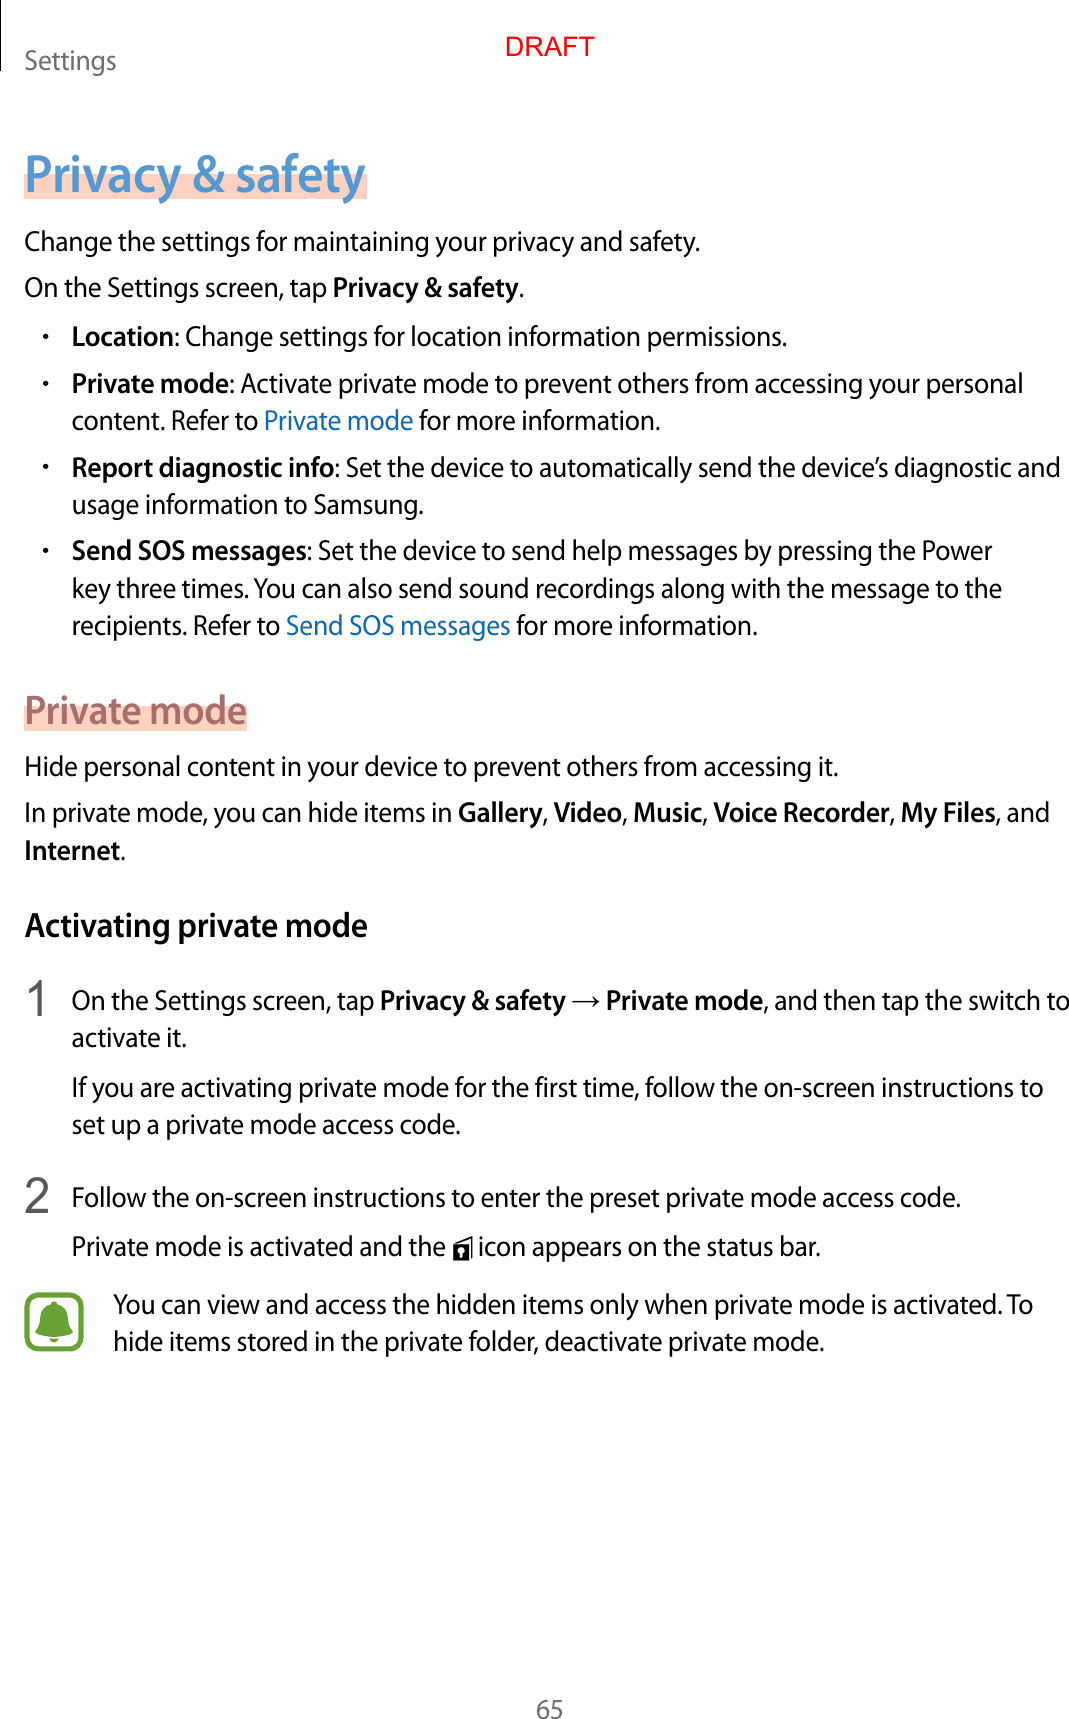 Settings65P rivacy &amp; safetyChange the settings for maintaining y our privacy and safety.On the Settings screen, tap Priv acy &amp; safety.•Location: Change settings for location information permissions.•Priv at e mode: Activate privat e mode t o pr ev ent others fr om ac cessing y our personal conten t. Ref er t o P riva te mode f or mor e information.•Report diagnostic info: Set the device to automatically send the devic e’s diagnostic and usage information t o Samsung .•Send SOS messages: Set the device to send help messages by pr essing the Power key three times . You can also send sound recordings along with the message t o the recipients . Ref er t o Send SOS messages for mor e information.Priv a te modeHide personal content in y our device t o pr ev ent others fr om ac c essing it.In private mode, y ou can hide it ems in Gallery, Video, Music, Voice Recor der, My F iles, and Internet.Activating priv at e mode1  On the Settings screen, tap Priv acy &amp; safety → Priv at e mode, and then tap the switch to activate it.If you are activating private mode for the first time, follo w the on-scr een instructions to set up a private mode acc ess c ode .2  Follow the on-screen instructions to enter the pr eset privat e mode ac cess c ode .Priva te mode is activated and the   icon appears on the status bar.You can view and access the hidden items only when private mode is activated . To hide items stor ed in the privat e f older, deactivate private mode .DRAFT